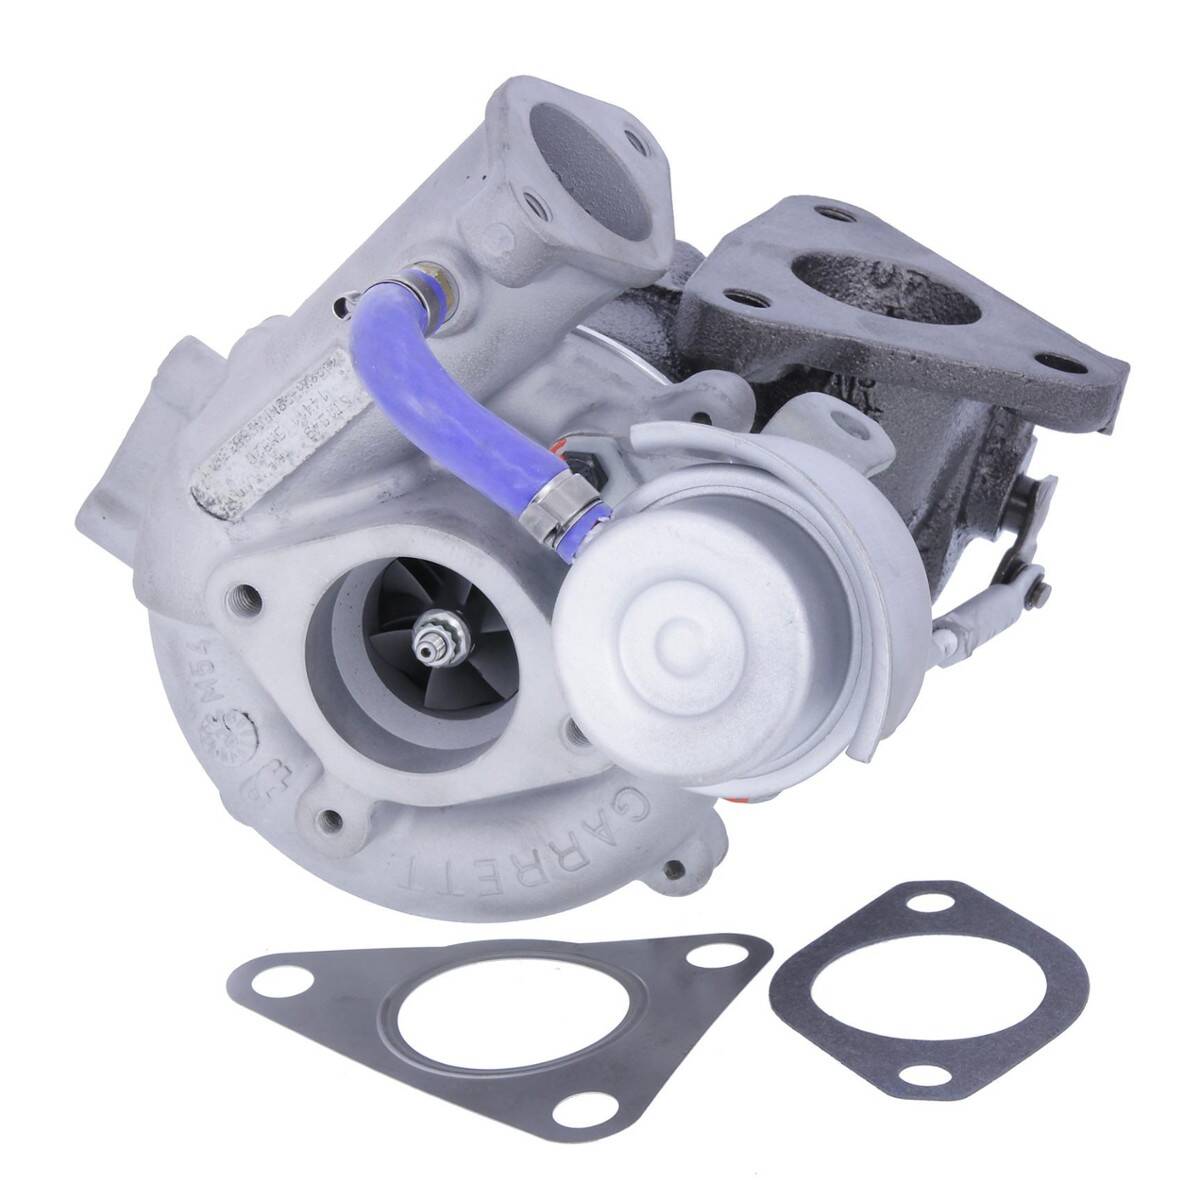 TURBOCHARGER TURBO REMANUFACTURED 452274-0006 452274-0006